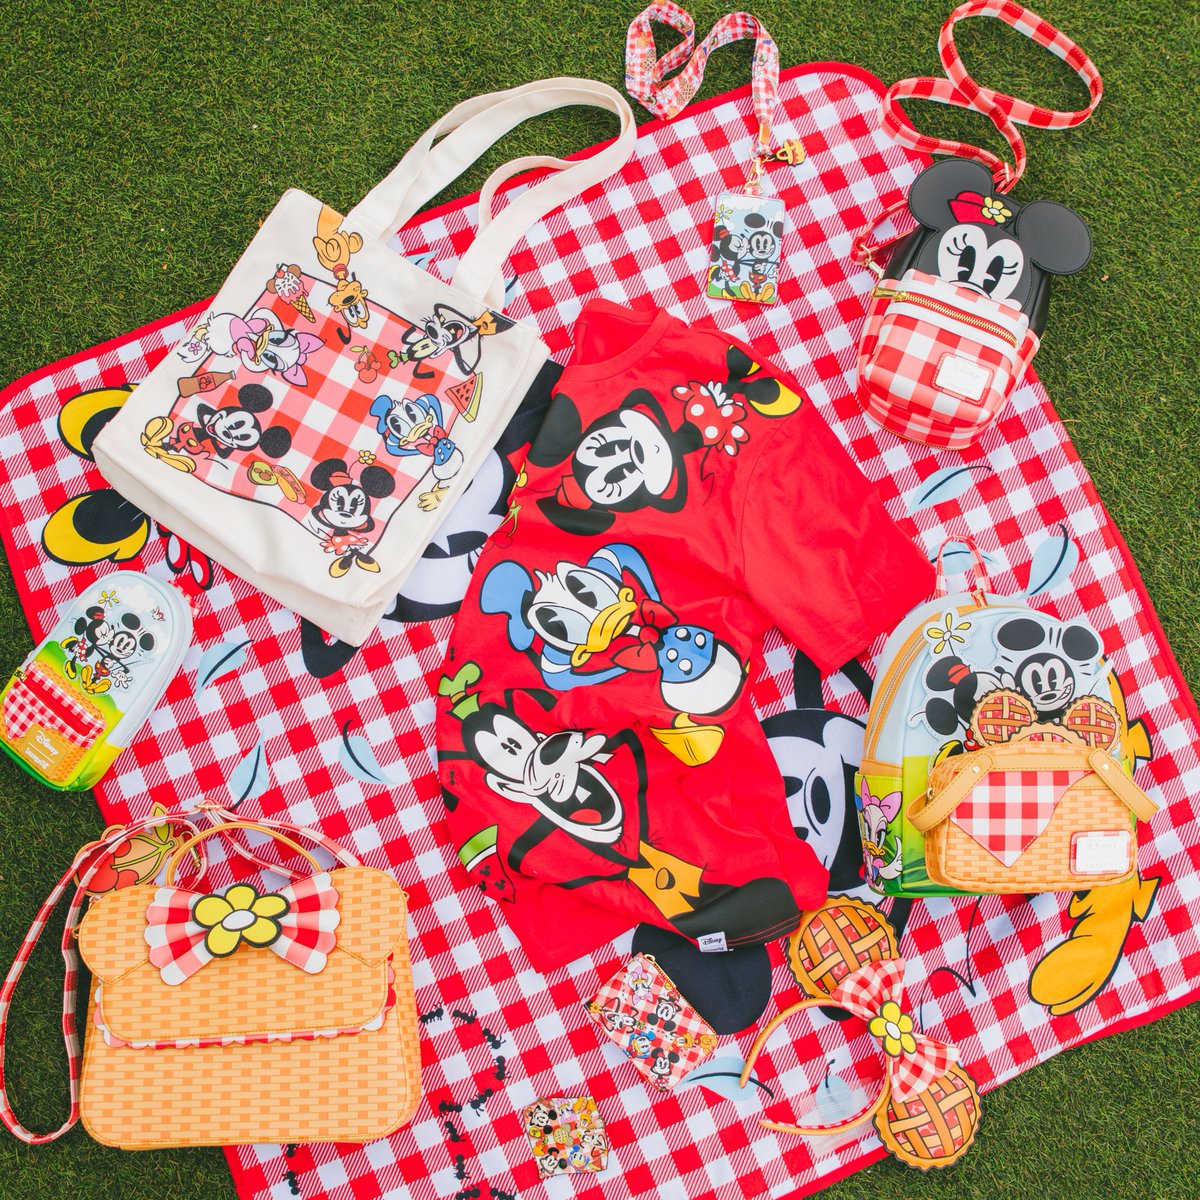 Join Disney's Mickey & Friends for the perfect picnic 🥧
tinyurl.com/Mickey-Picnic